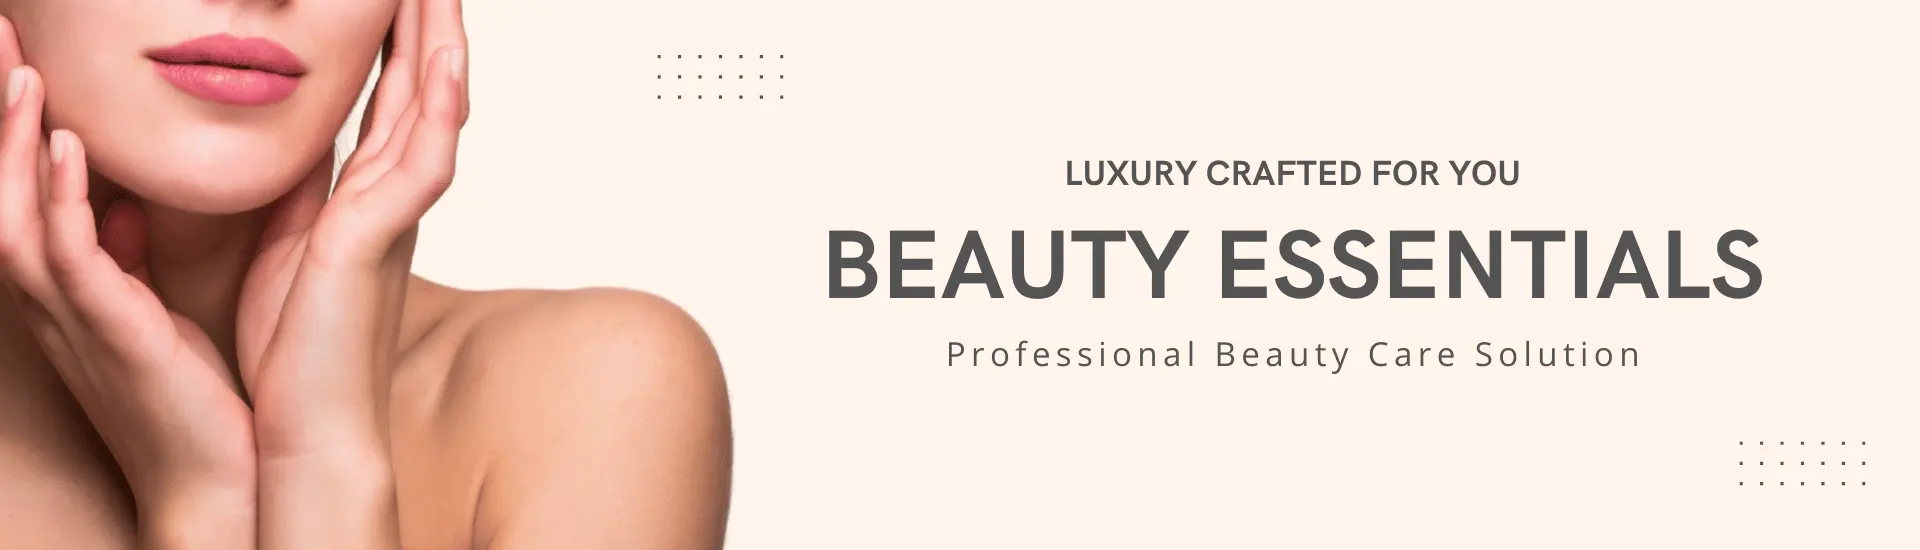 Luxury Beauty Care Solution